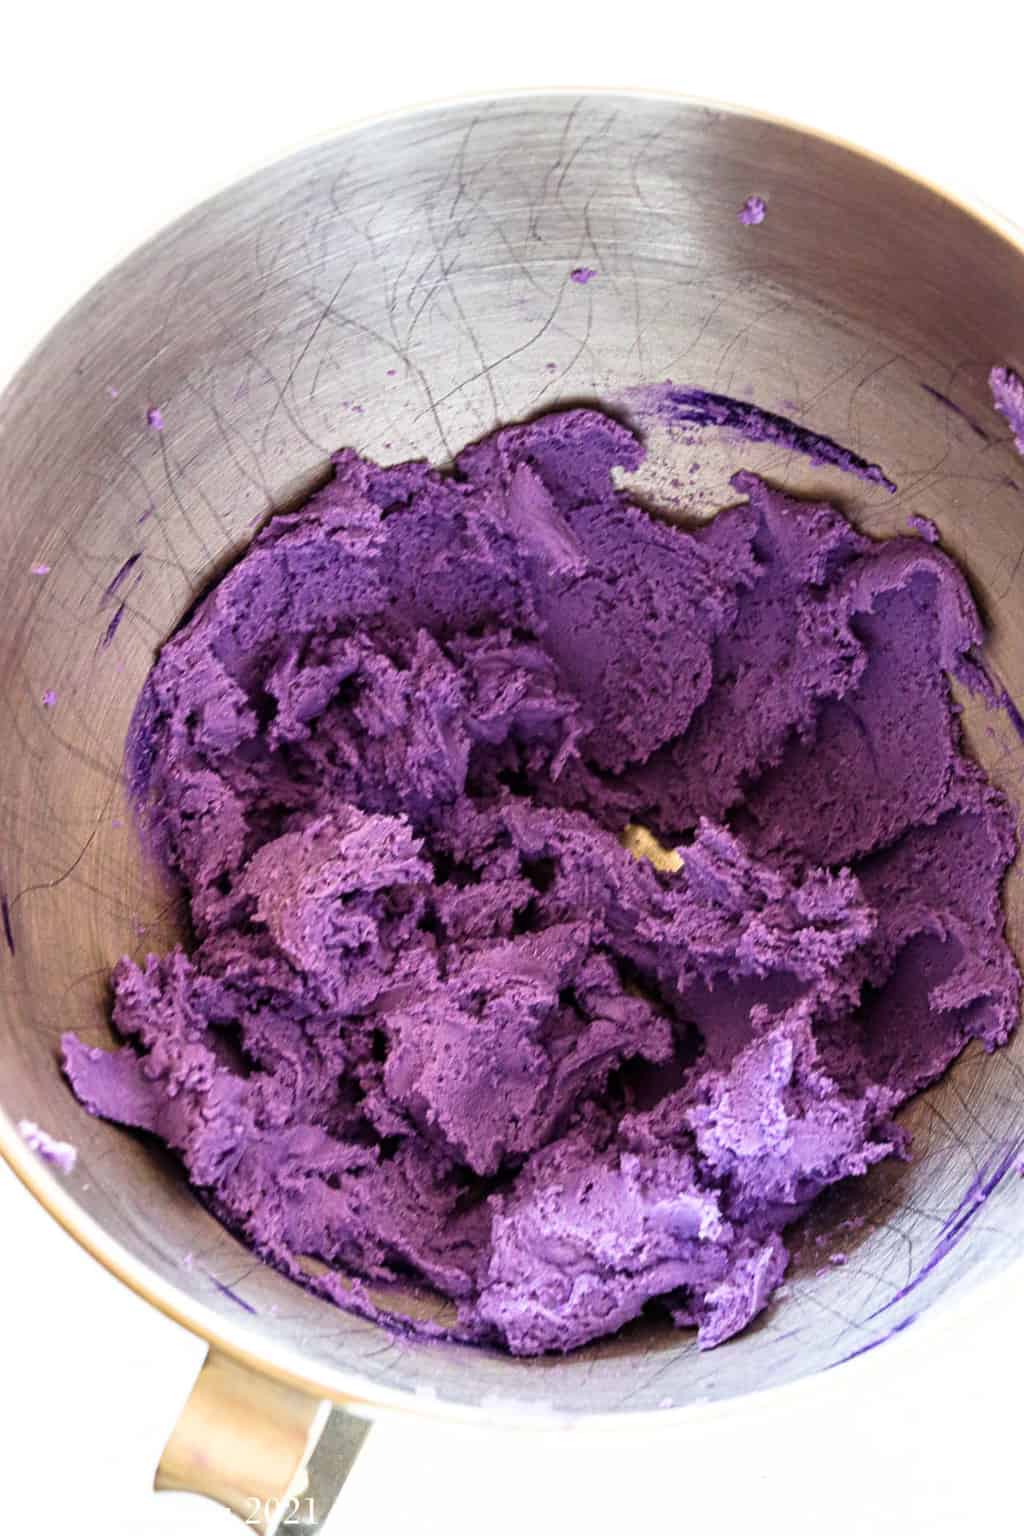 Cream cheese spritz cookies with purple food coloring added